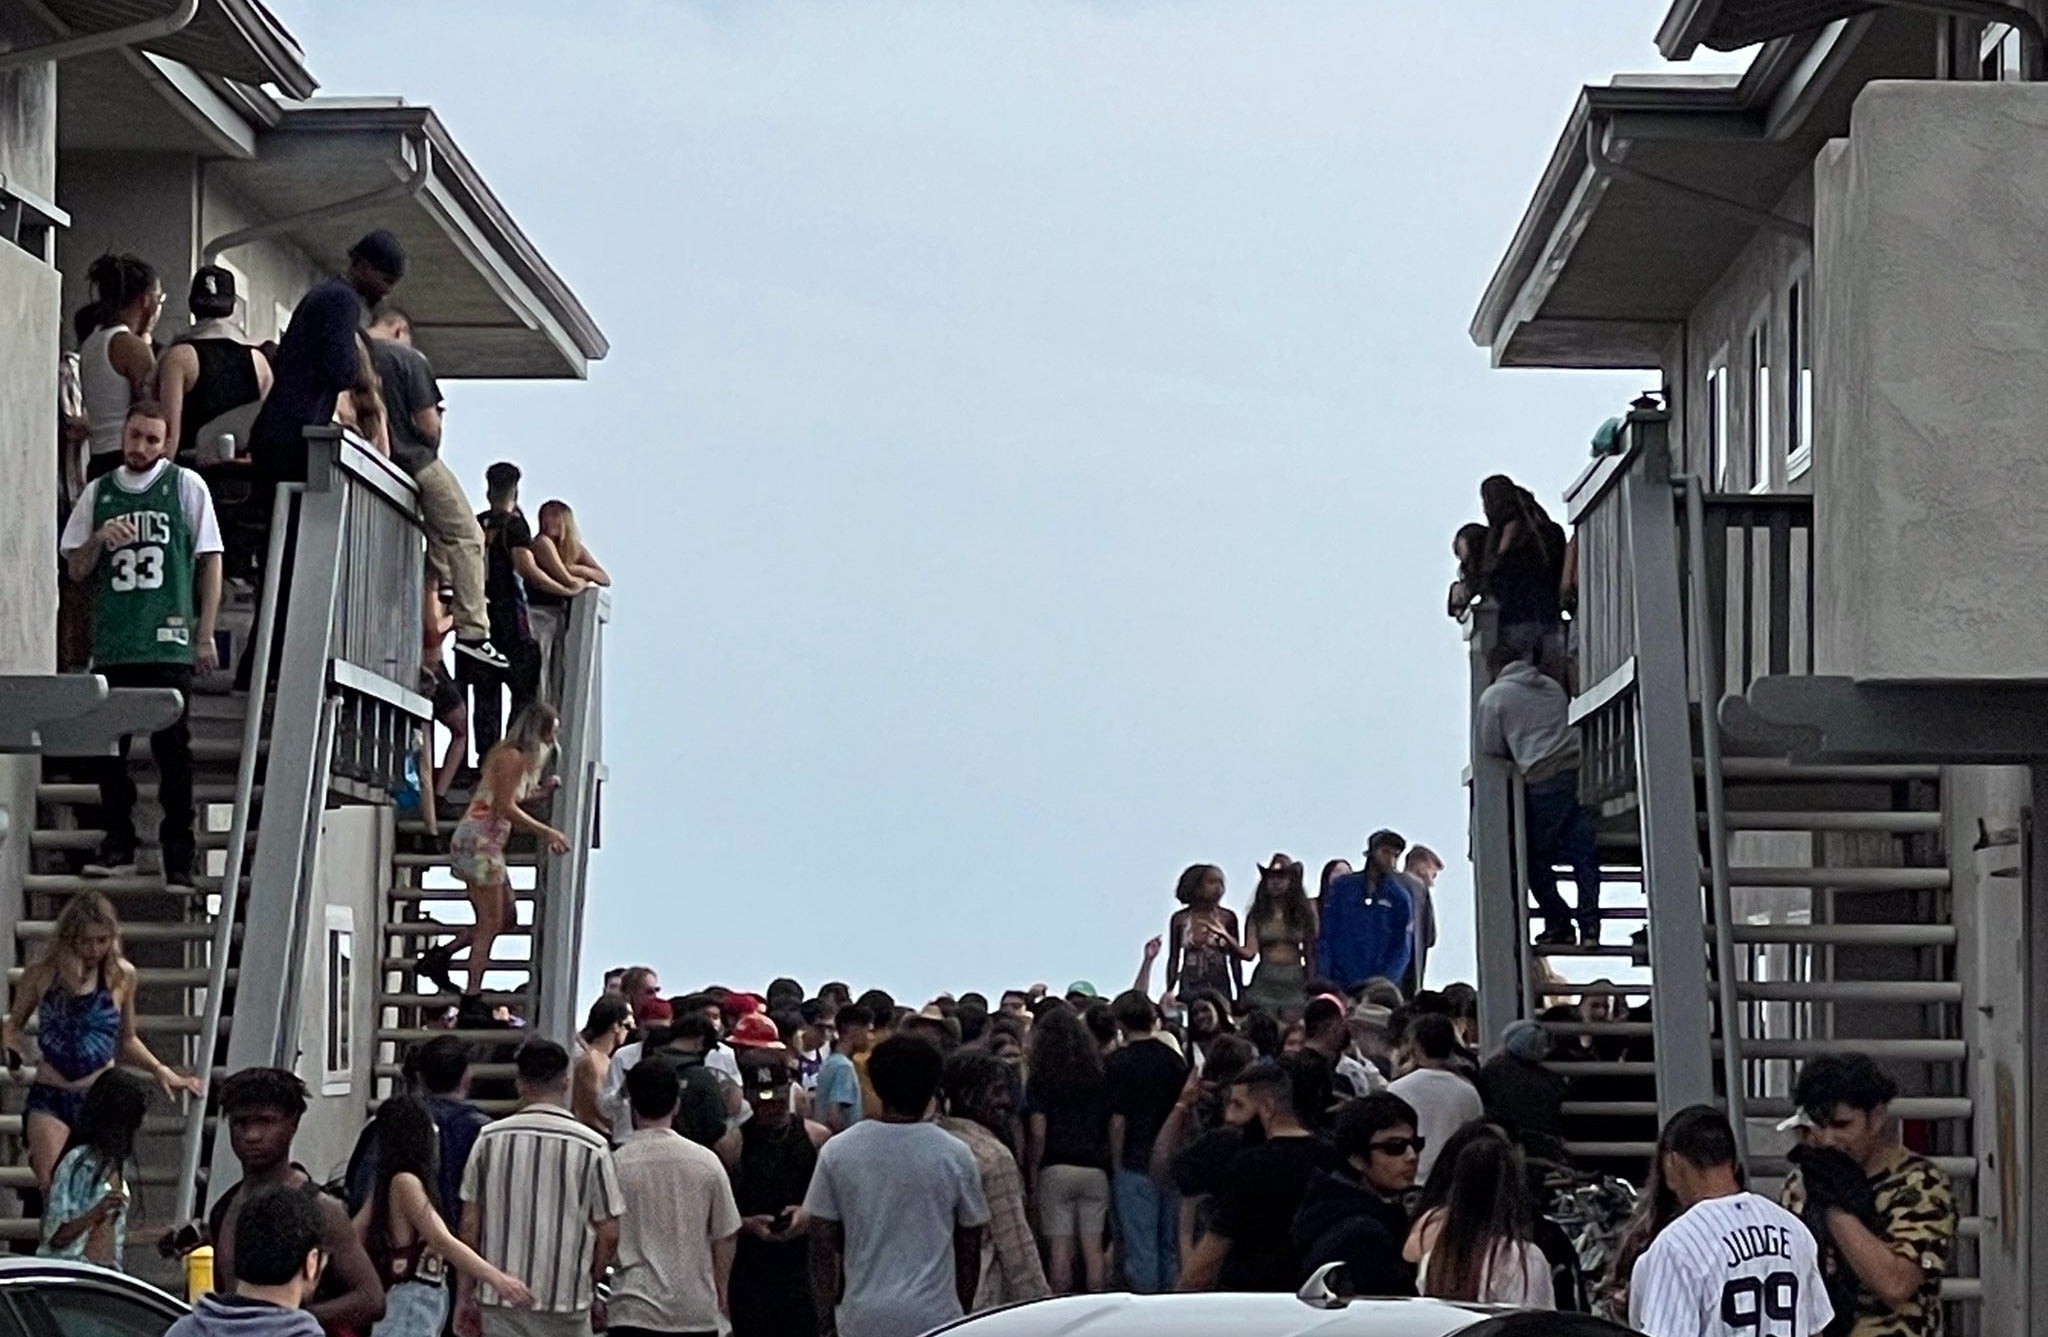 Authorities declared a “multi casualty incident” as thousands of students took part in a chaotic spring break party in California